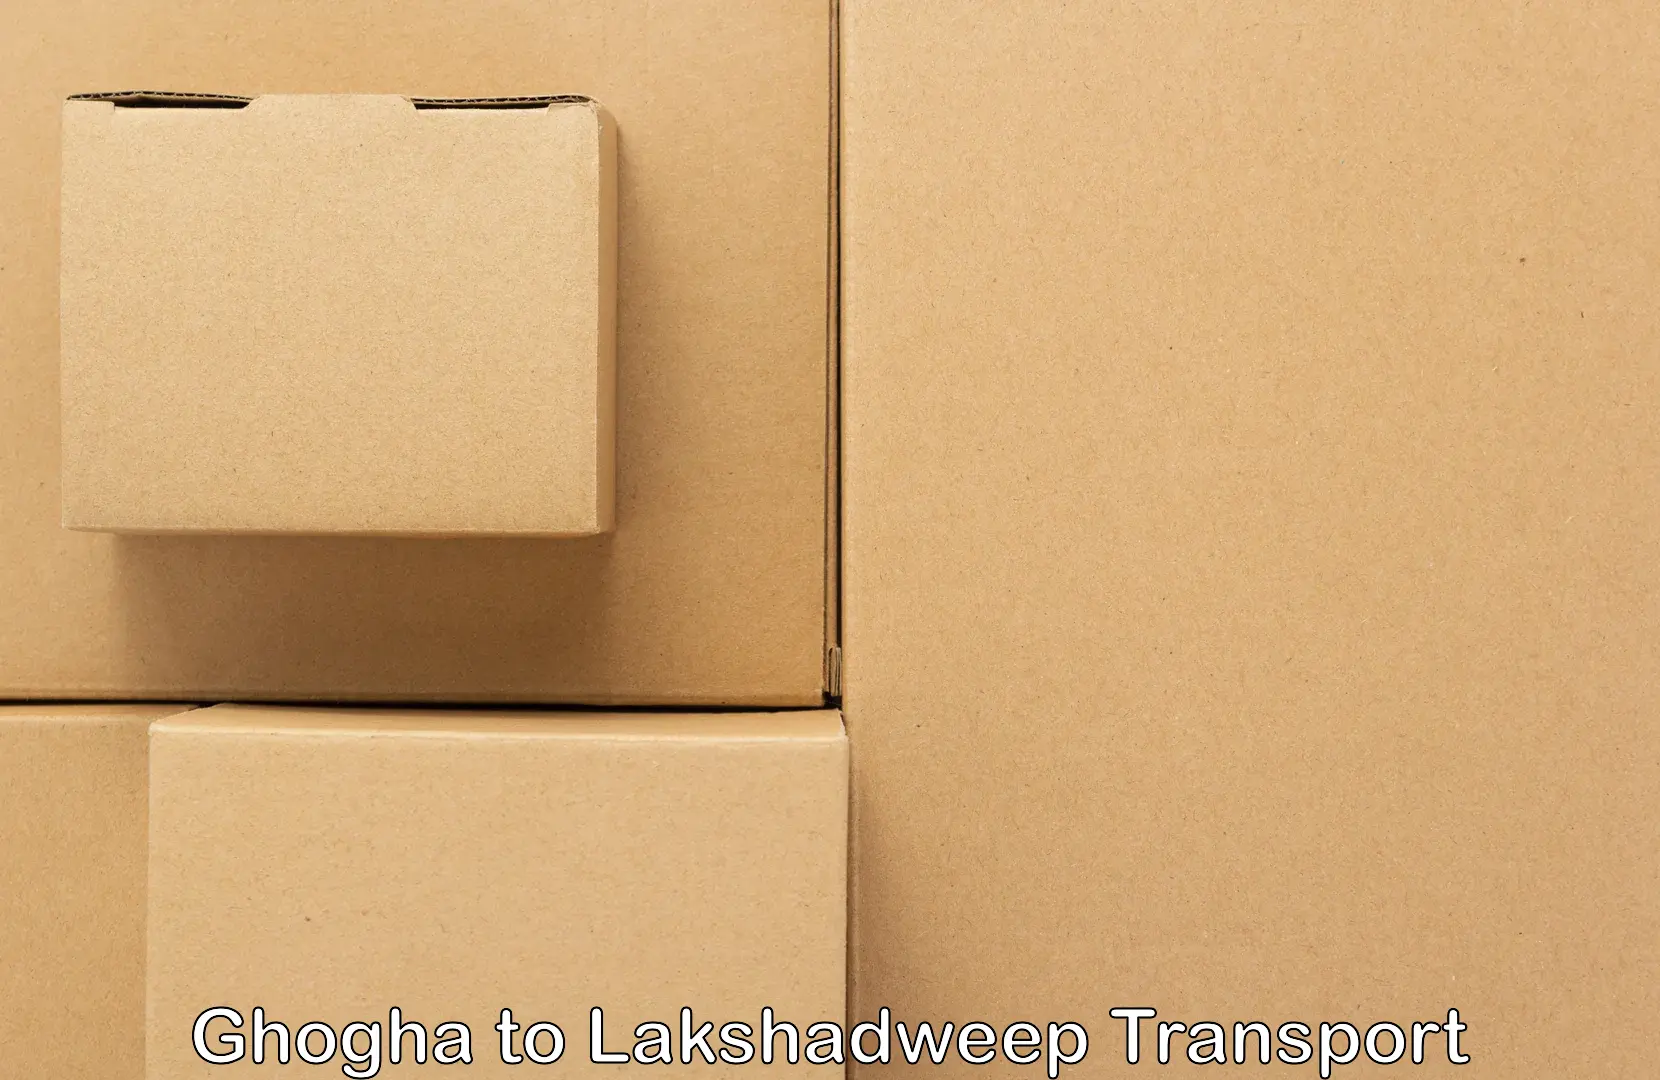 Container transport service Ghogha to Lakshadweep